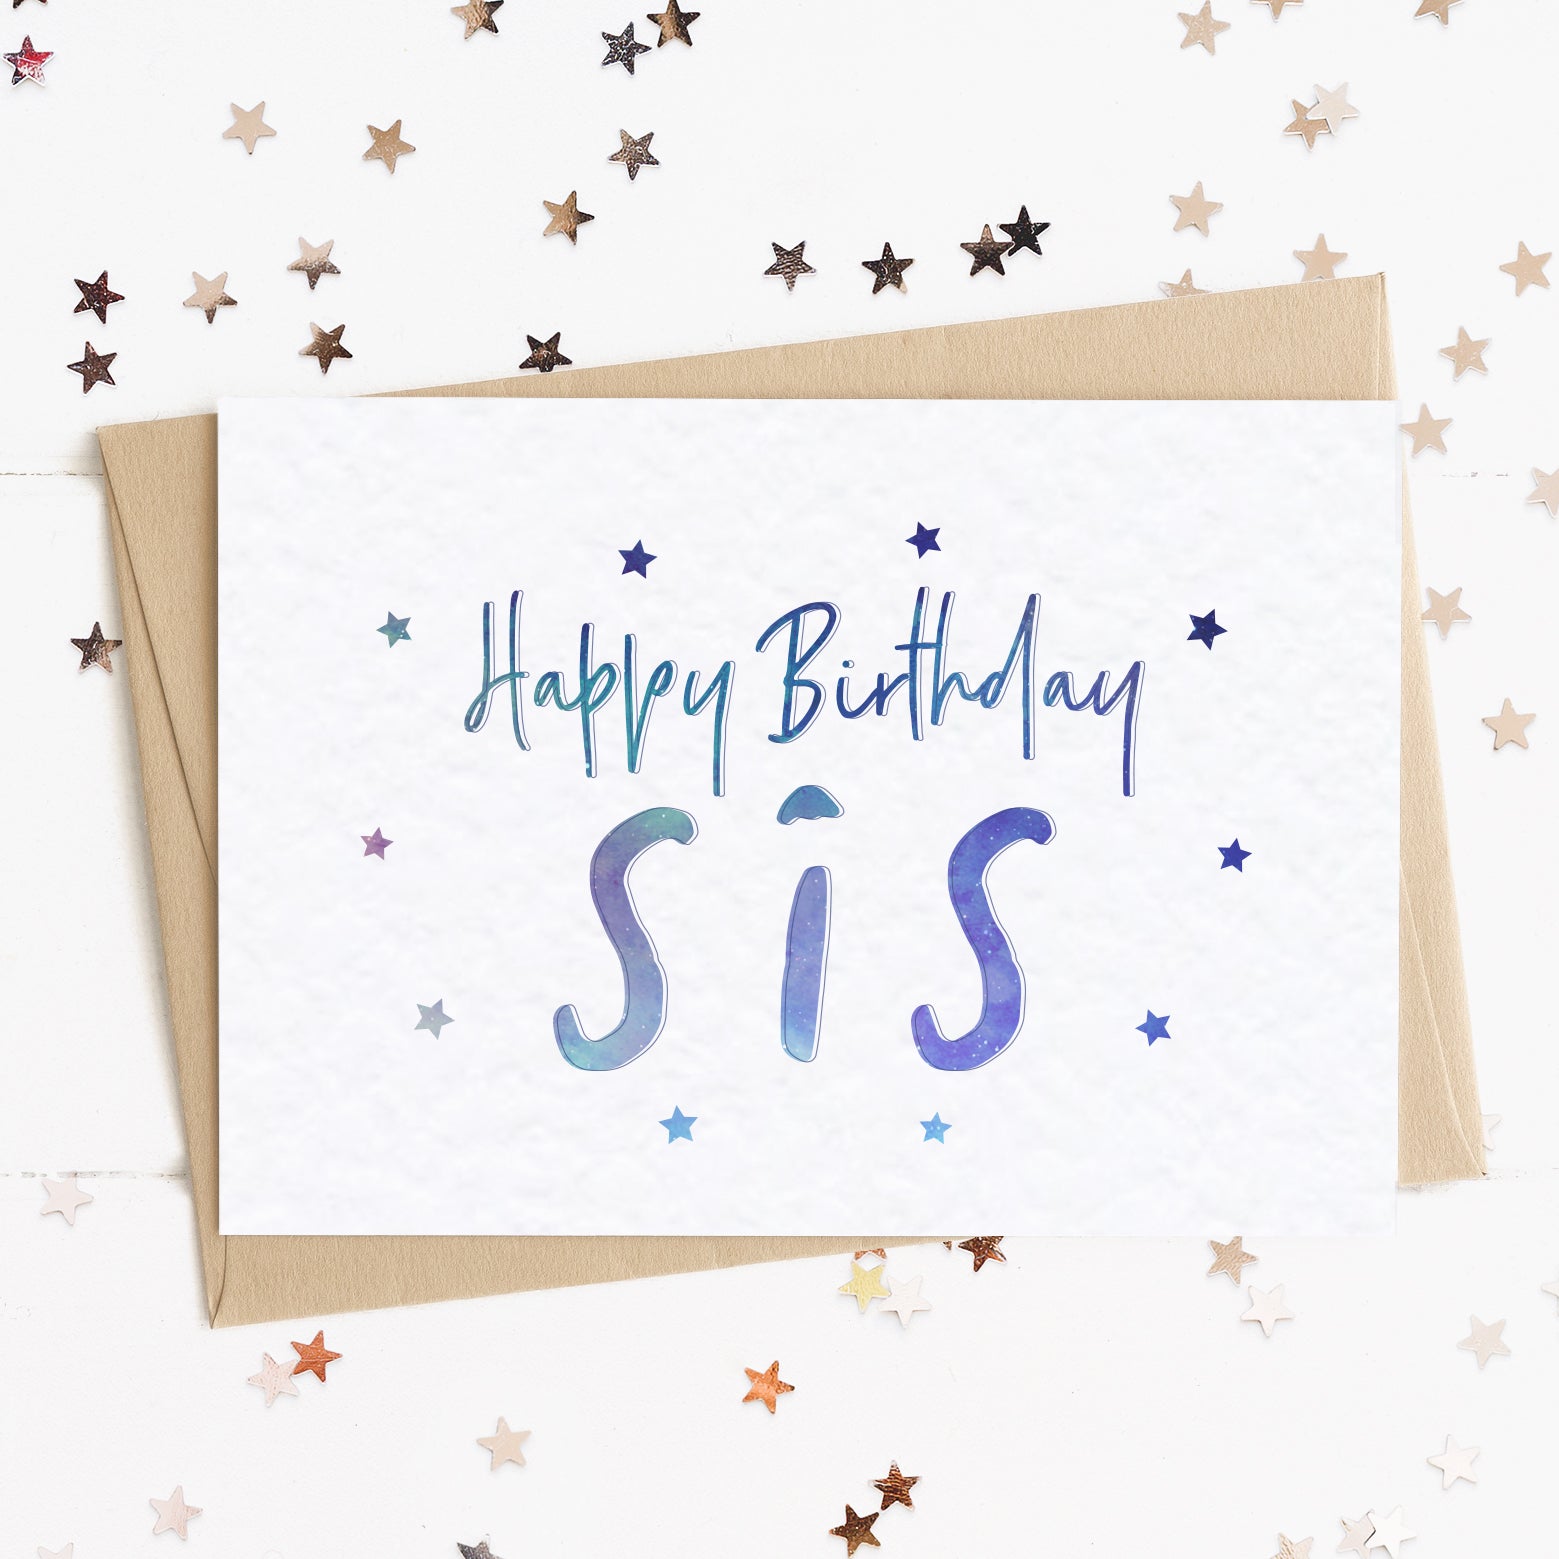 A sister birthday card with a stars and text in colours inspired by the northern lights/universe and the message, "Happy Birthday Sis".